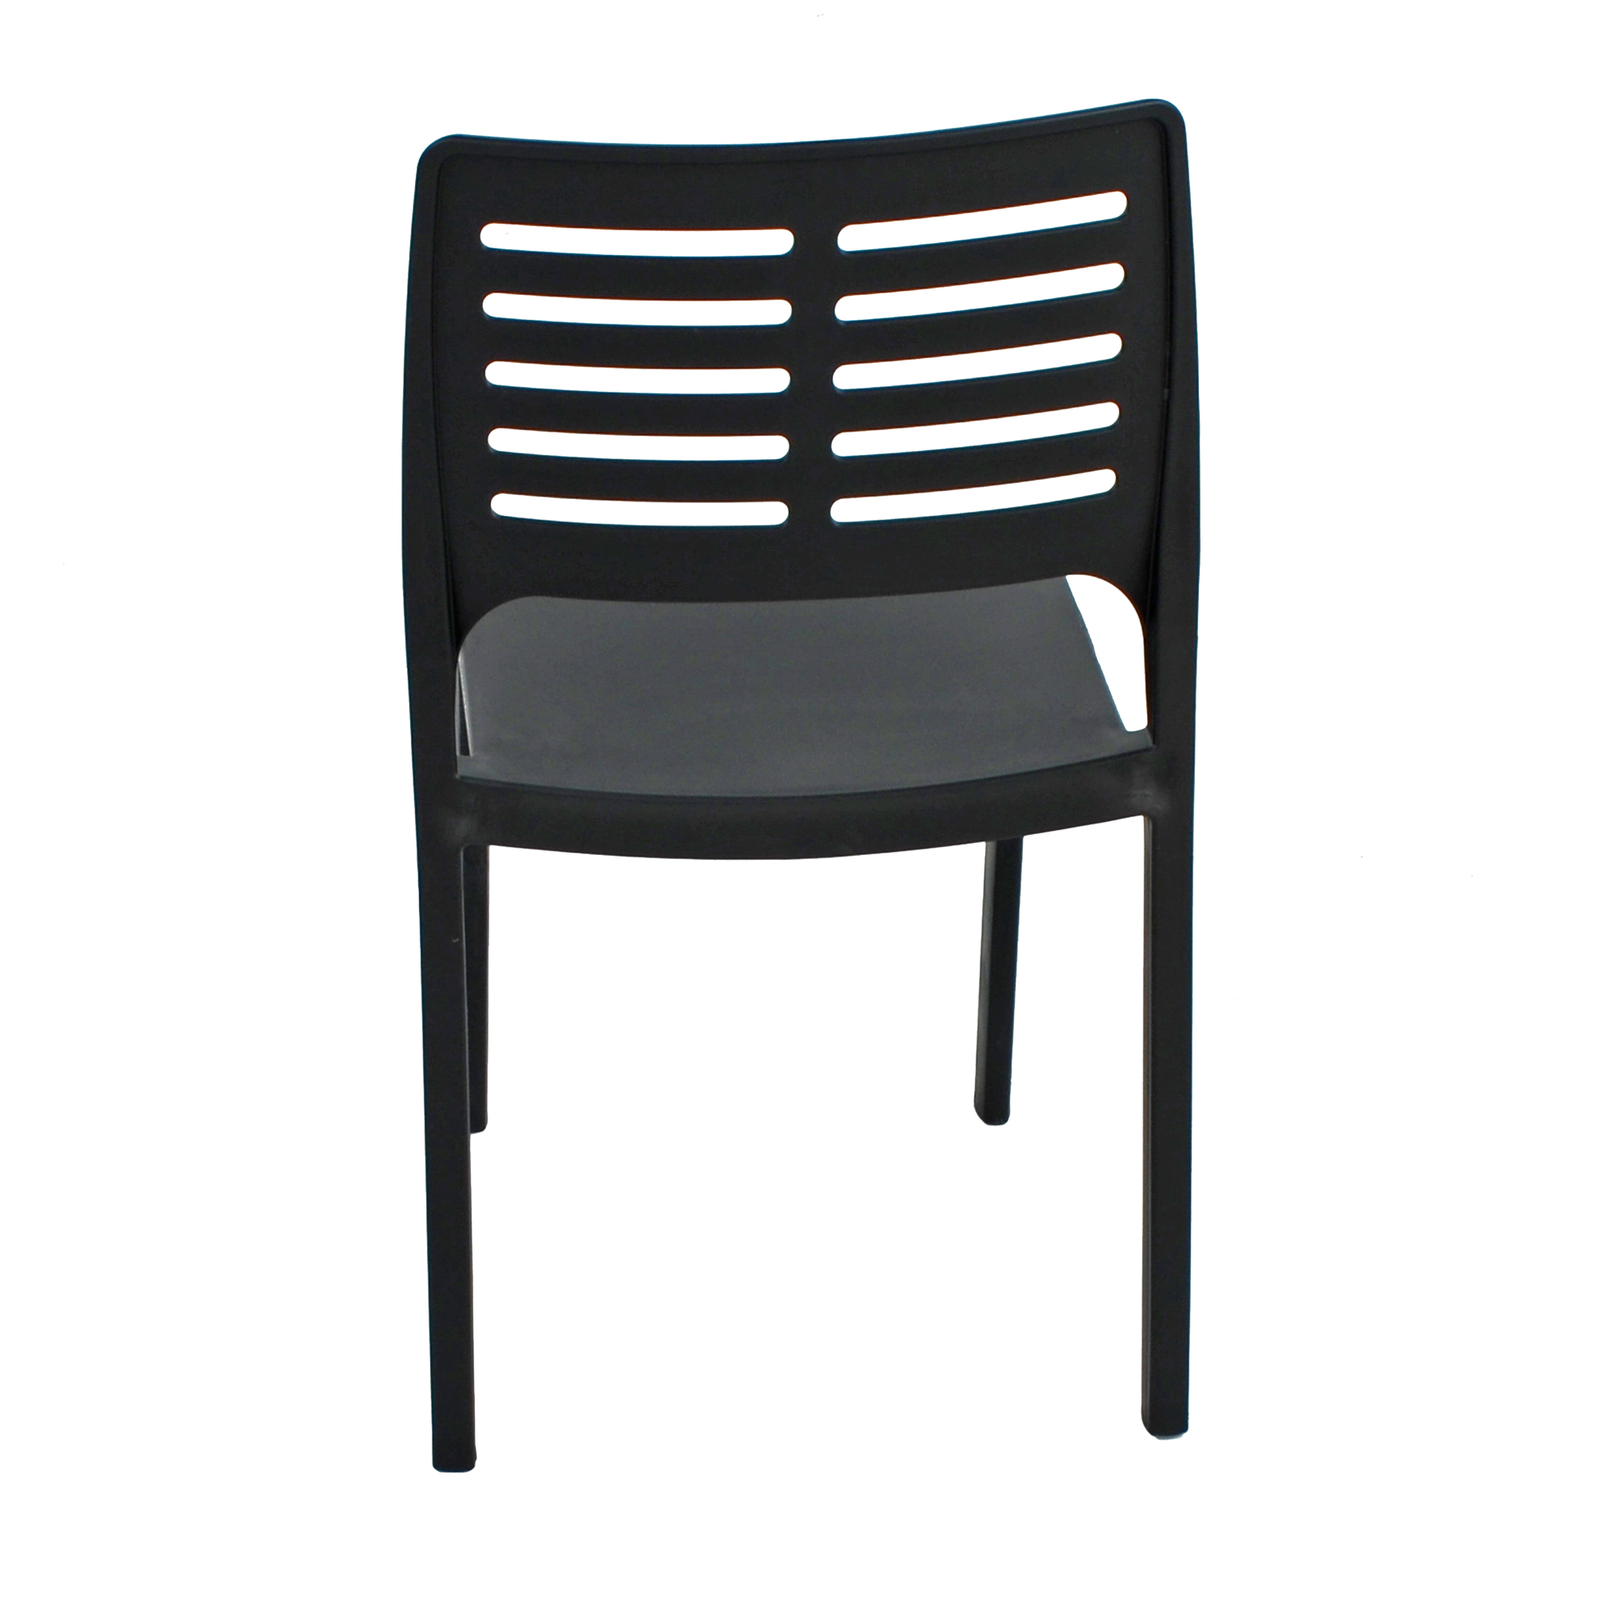 Trabella Mistral Chair in Anthracite (Pack of 2) Chairs Trabella   